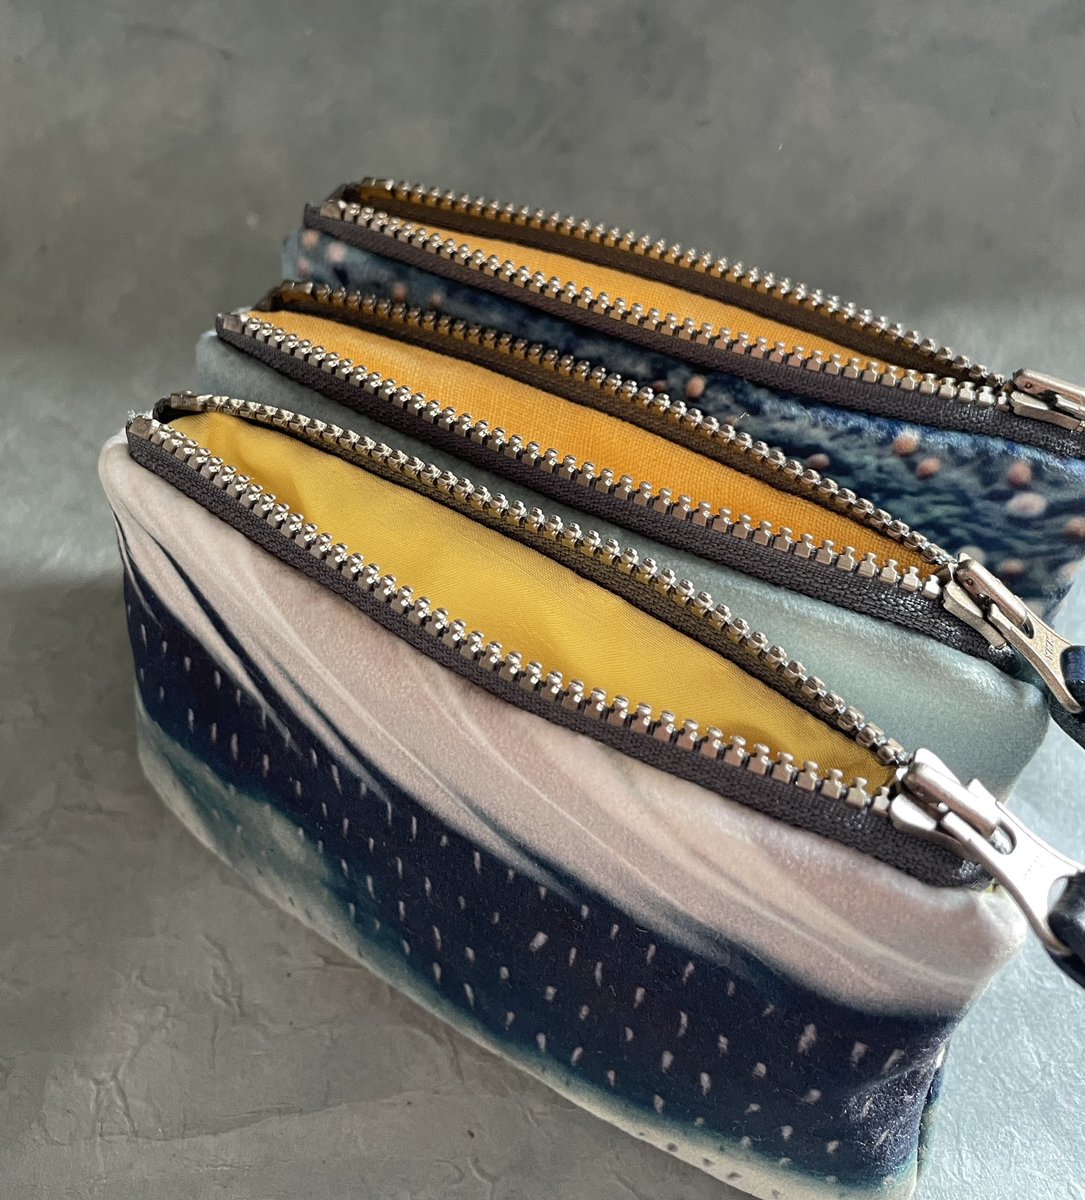 Finished up this custom order. Velvet purses with hand-dyed gorse flower linings.